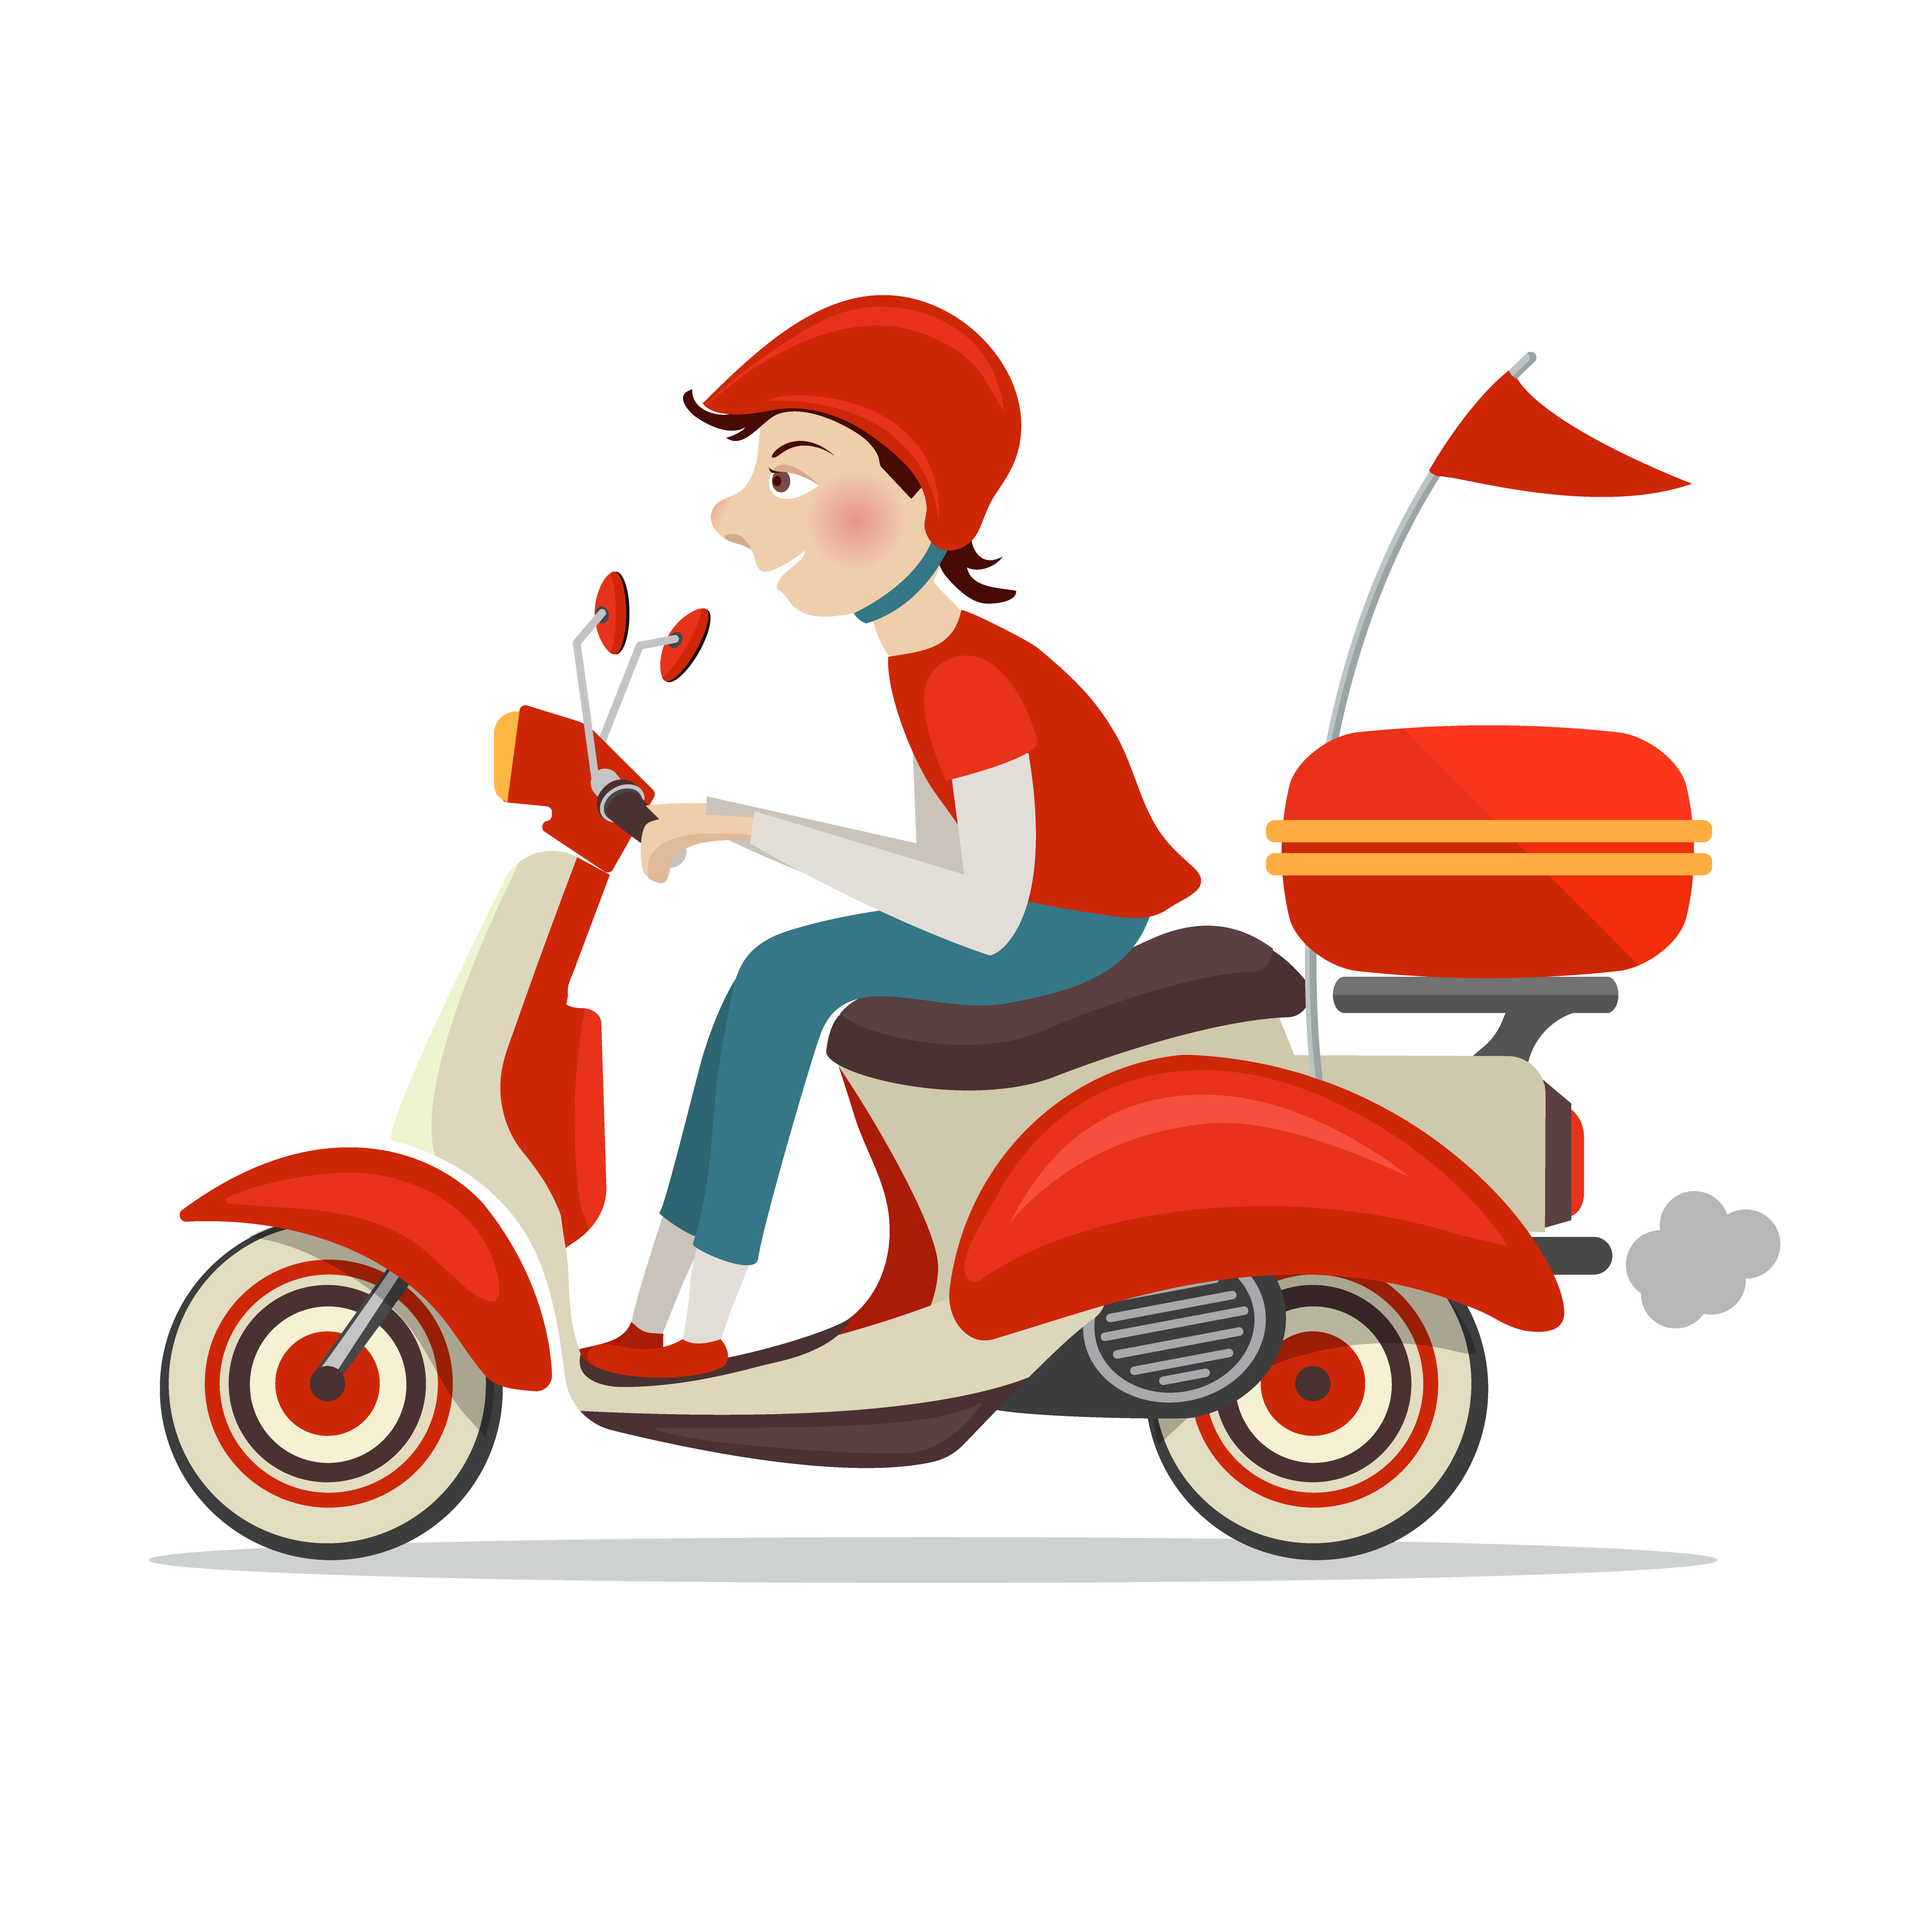 Scooter delivery icon 454422 Download Free Vectors 